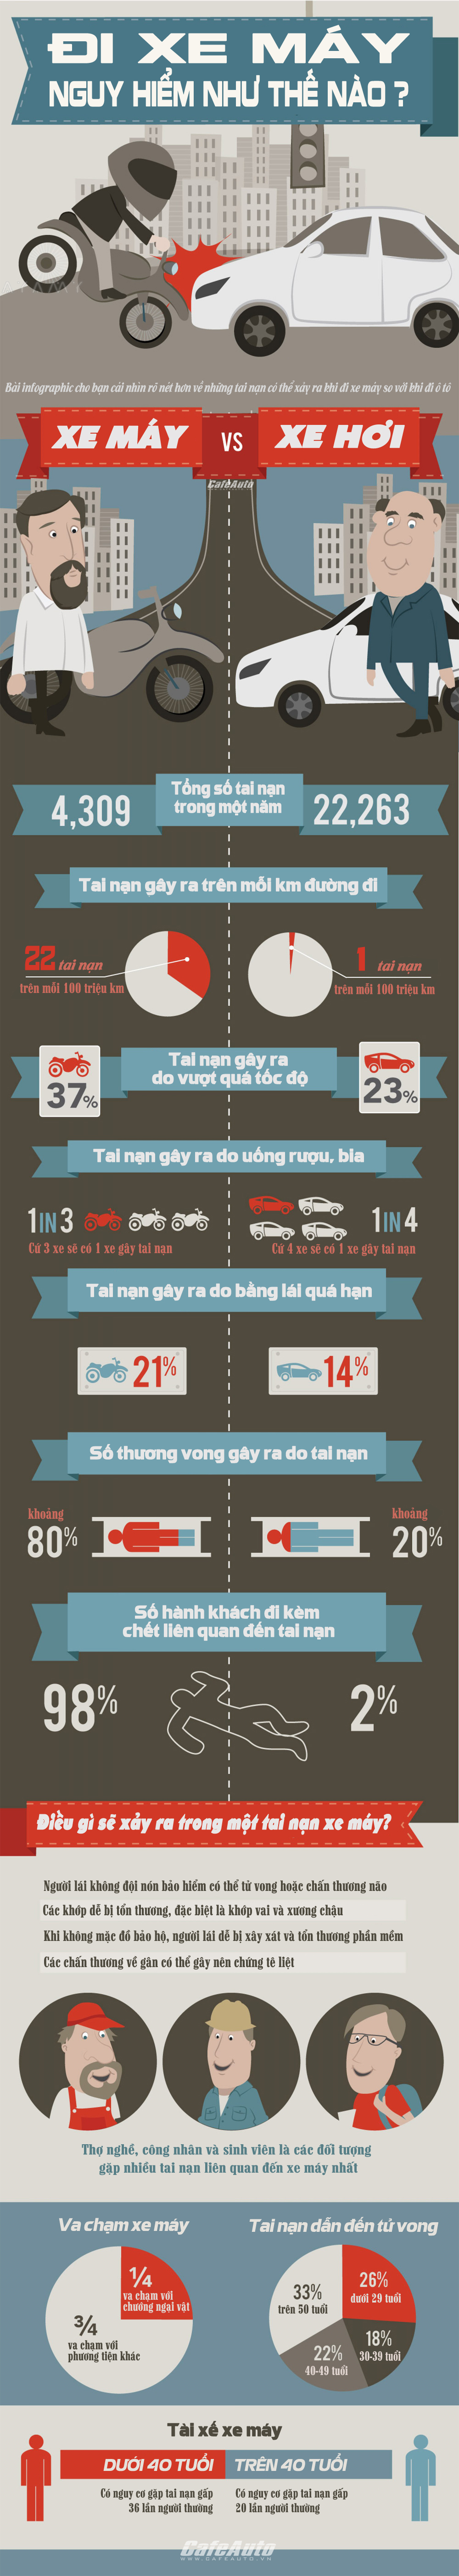 Theo Infographic di xe may nguy hiem hon rat nhieu so voi o to